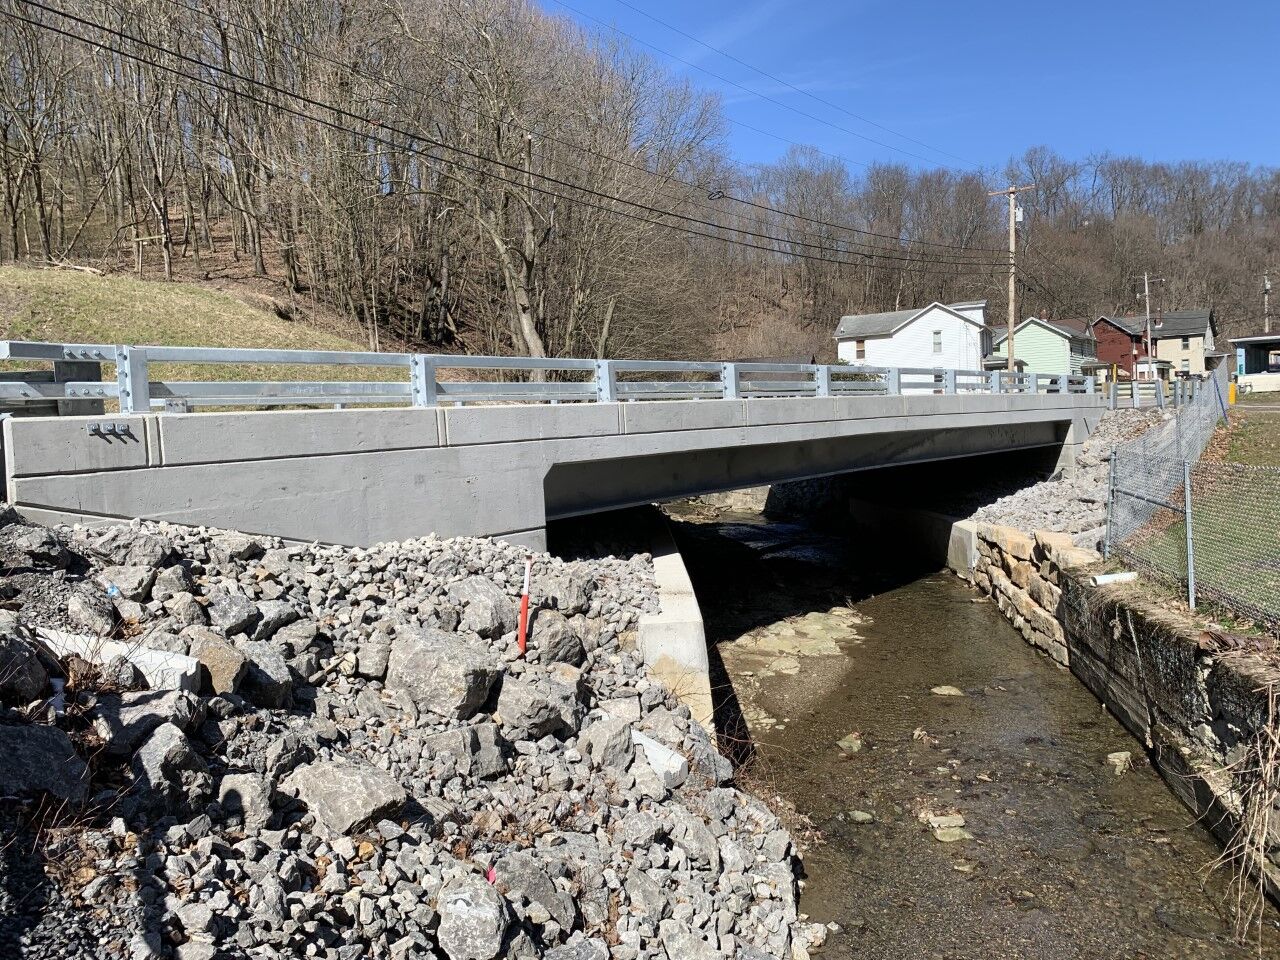 PennDOT District 10 recognized for Brady's Run project | News